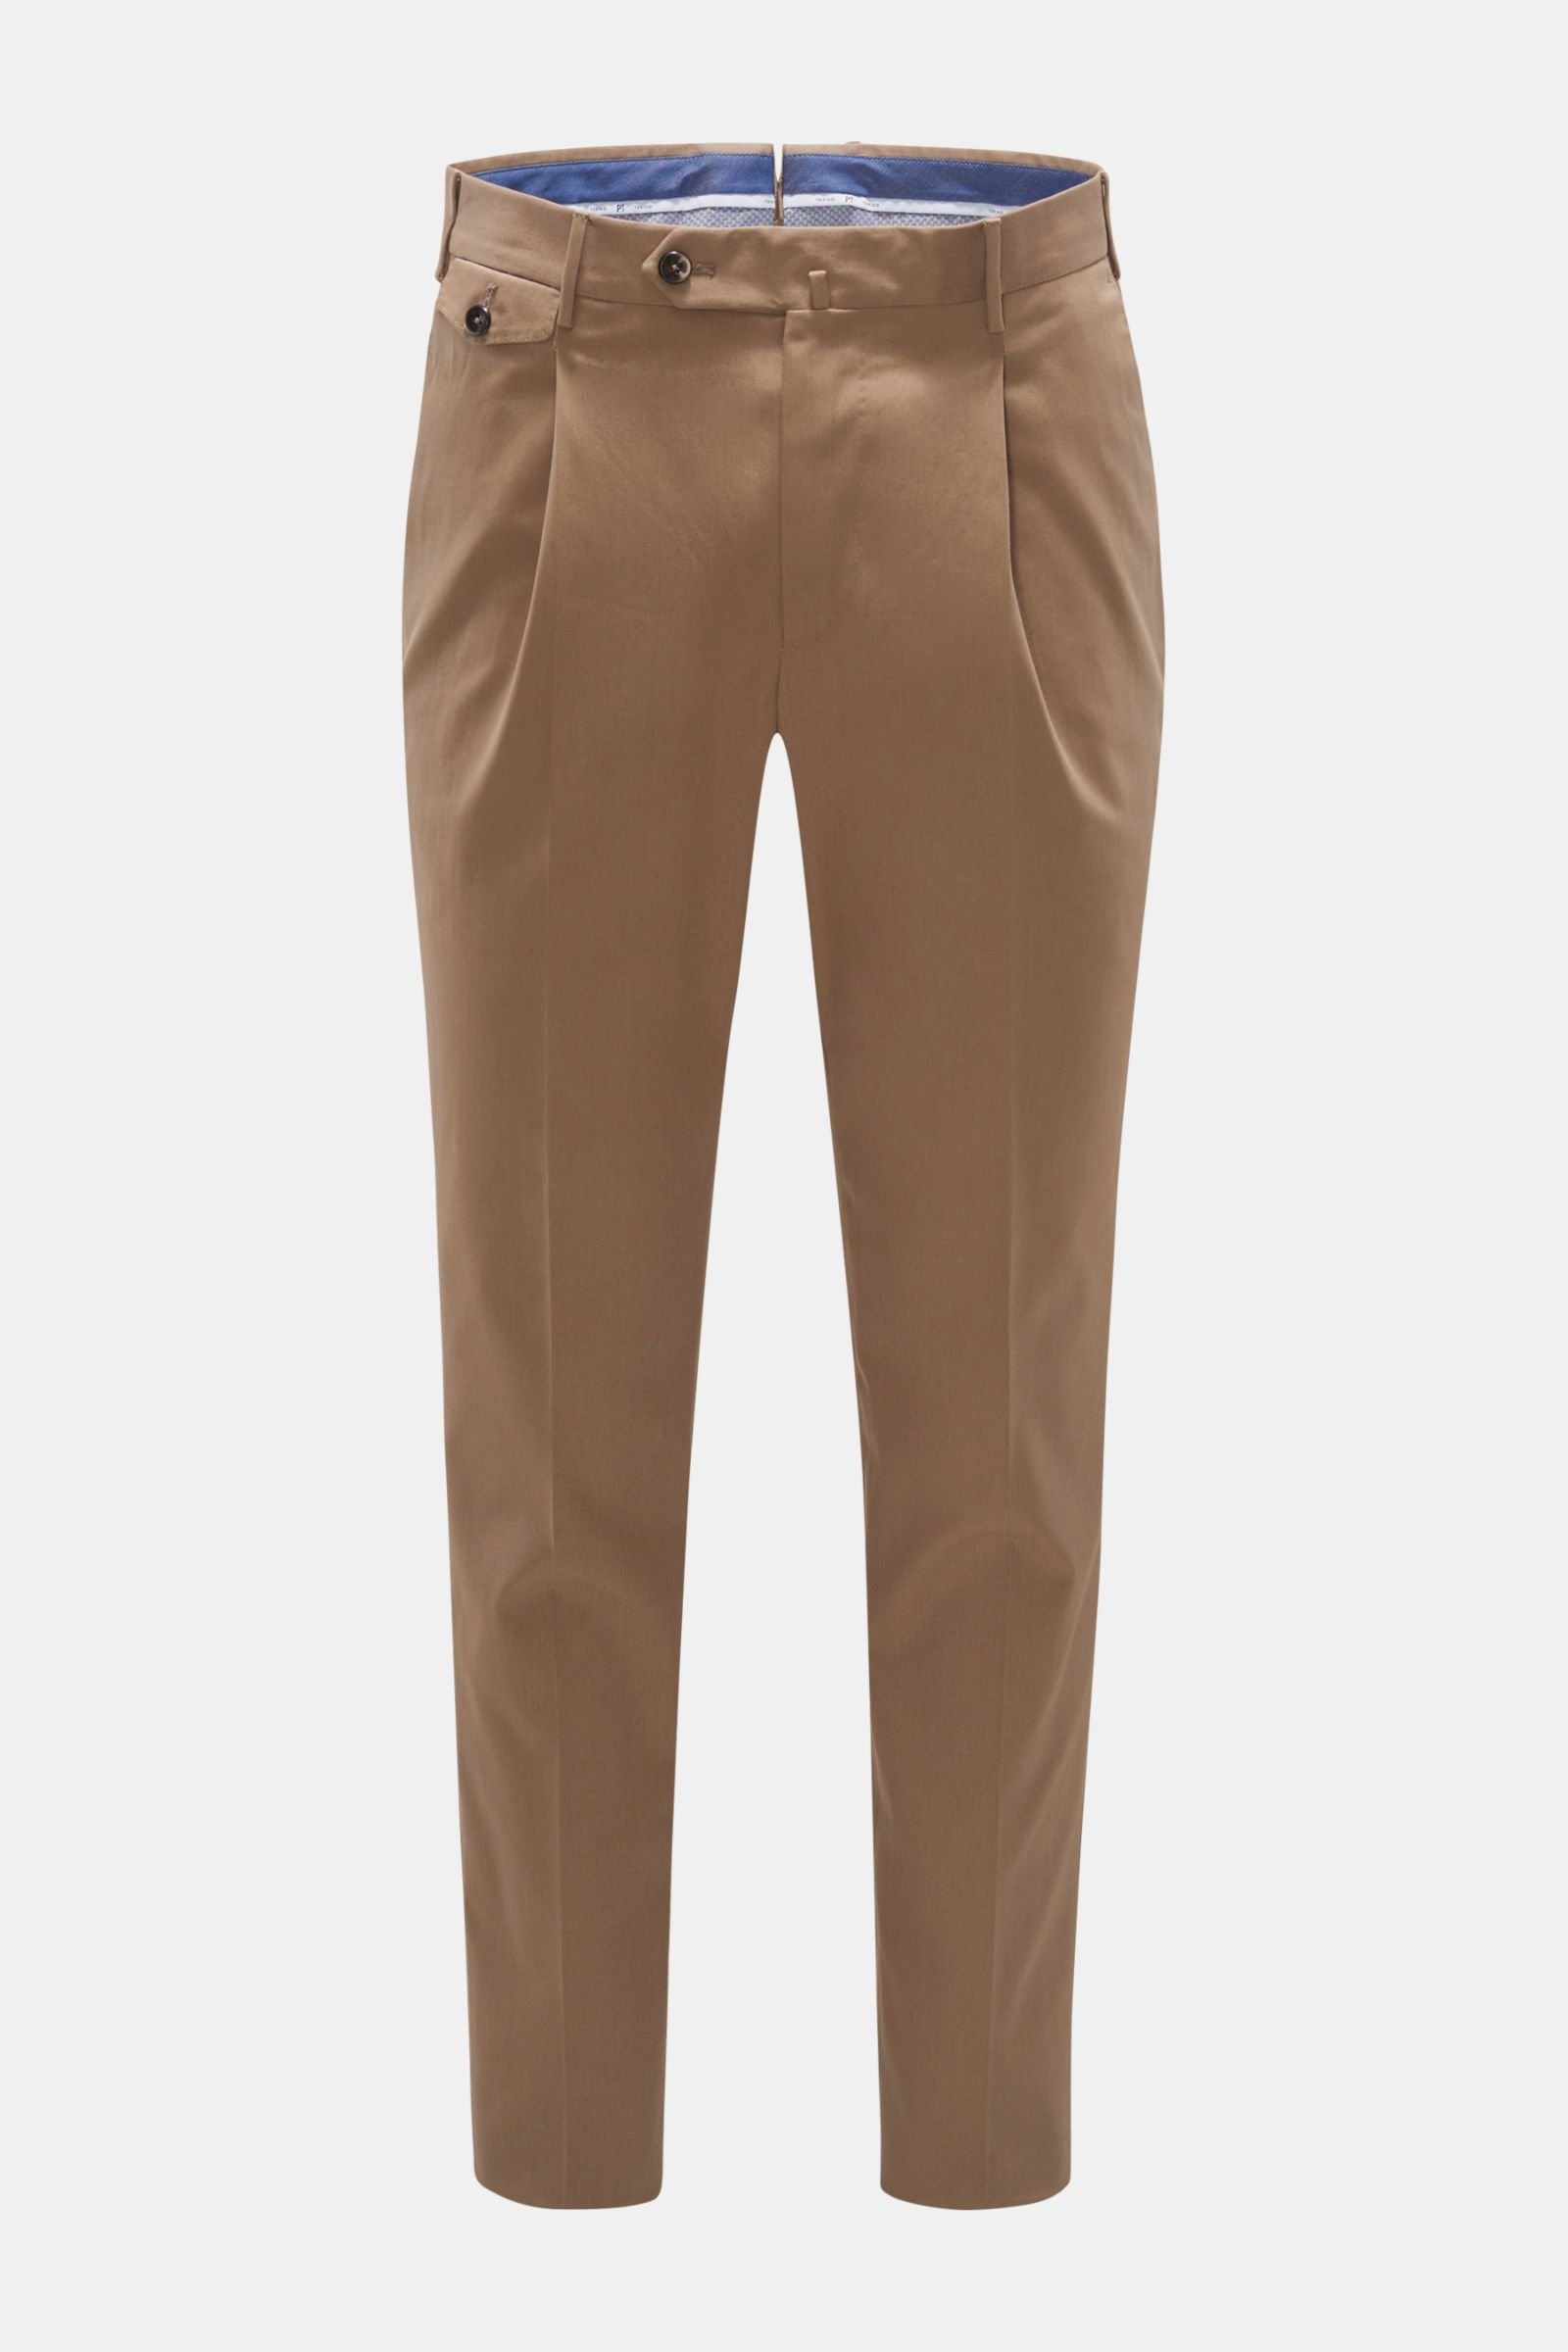 Cotton trousers 'Gentleman Fit' grey-brown